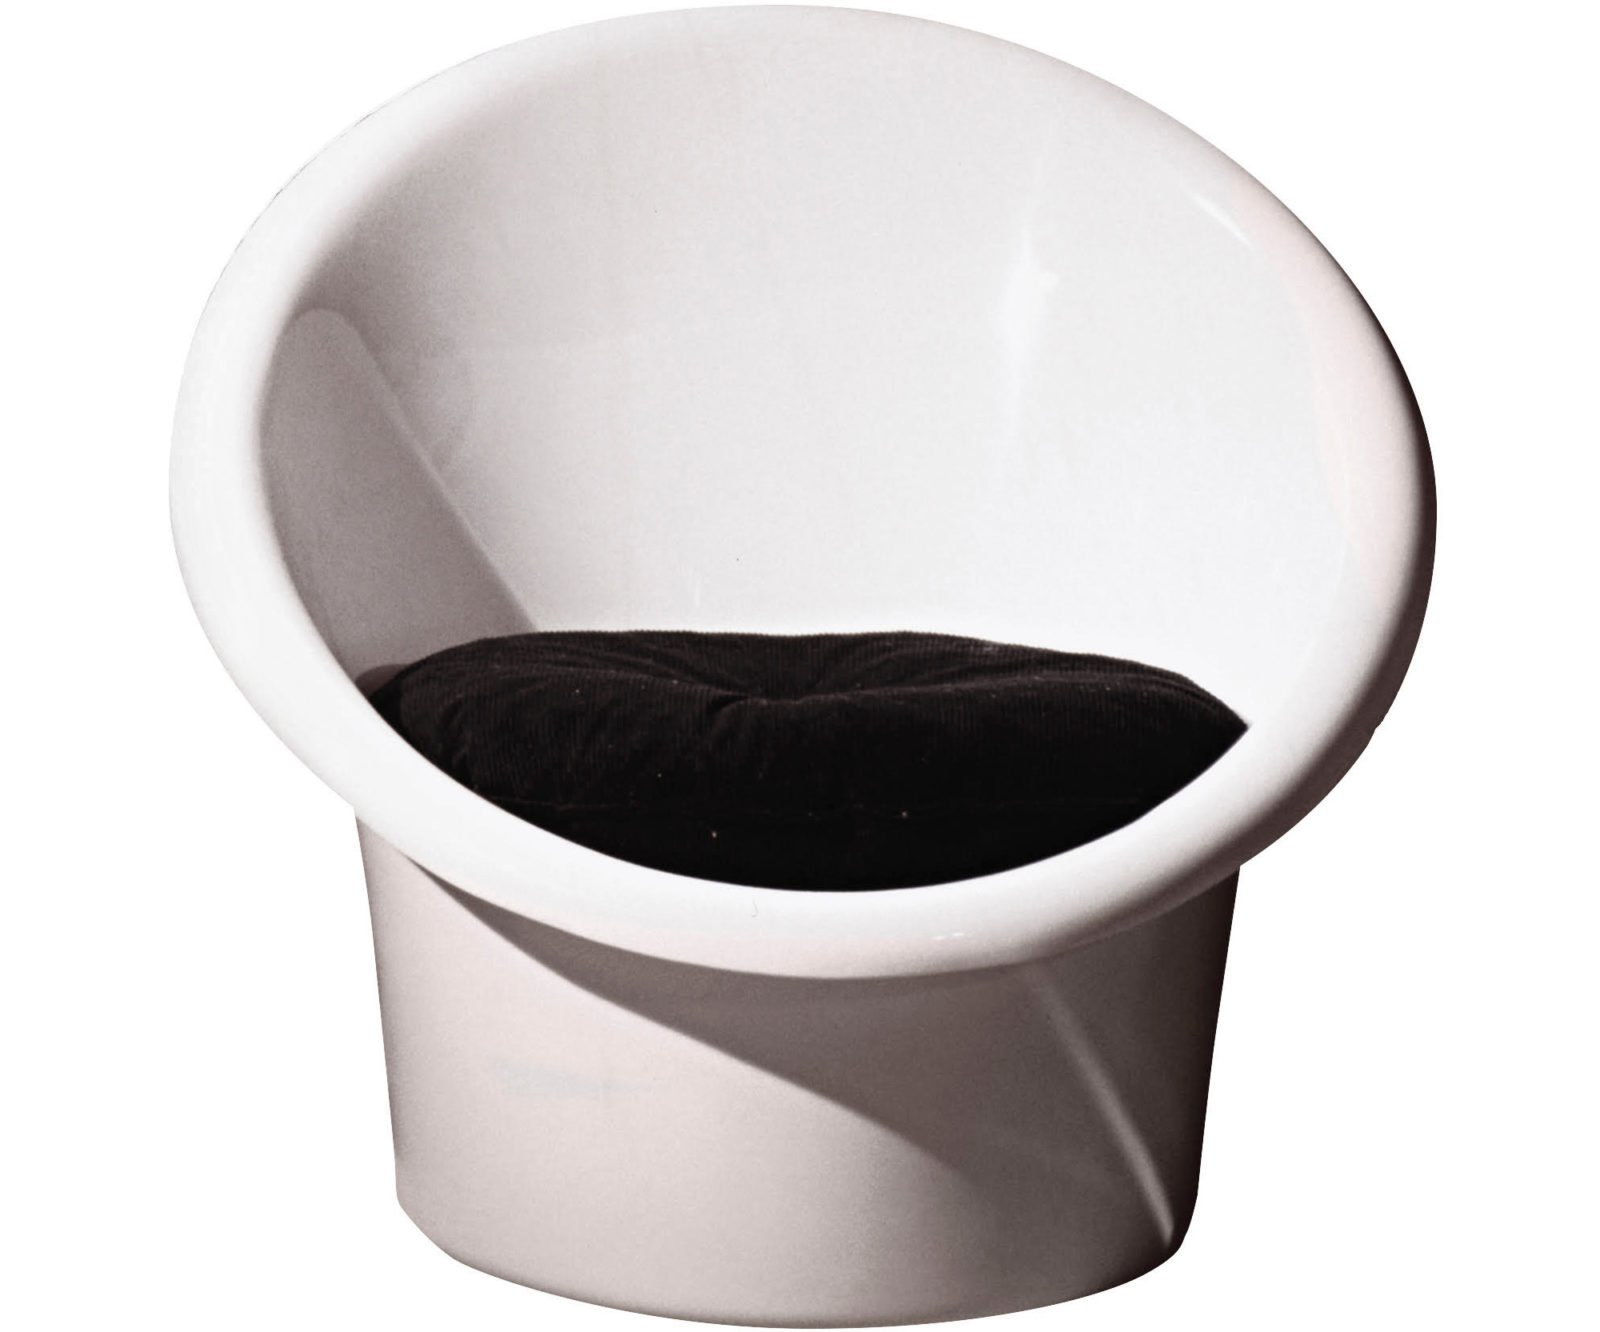 Bucket chair made of white plastic with black corduroy seat cushion, SKOPA.